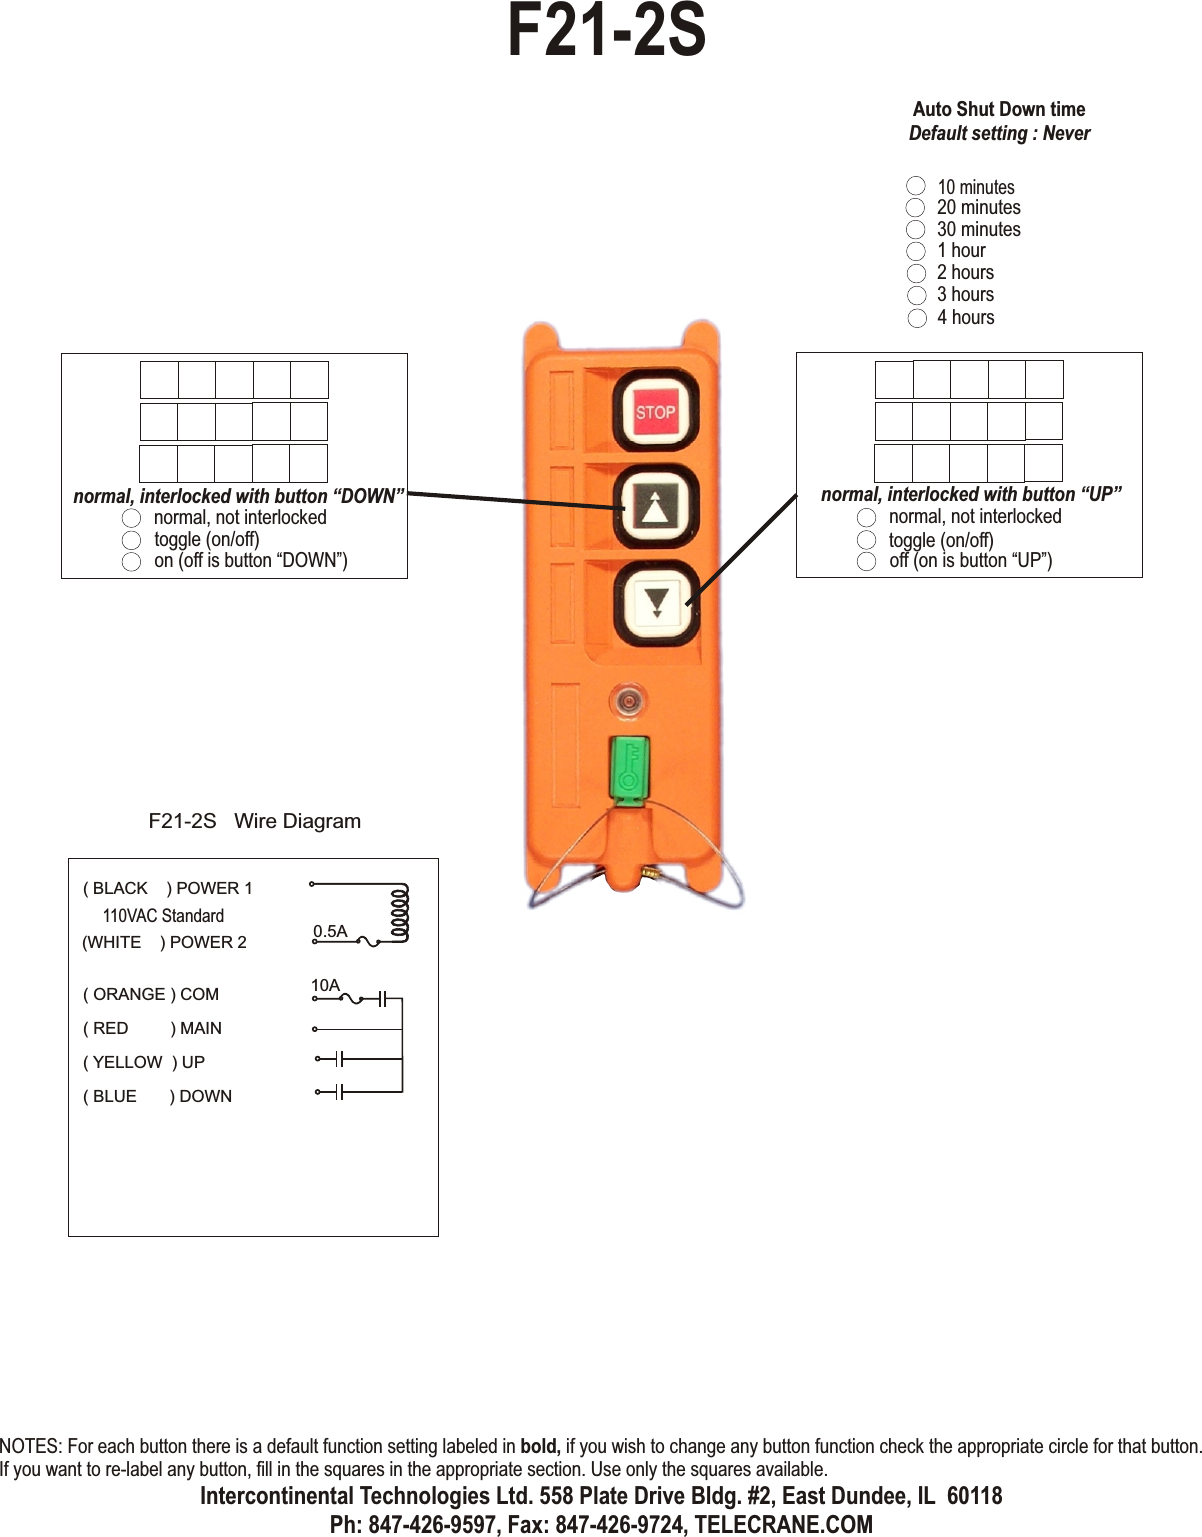 normal, not interlockedtoggle (on/off)off (on is button “UP”)normal, interlocked with button “UP”normal, not interlockedtoggle (on/off)on (off is button “DOWN”)normal, interlocked with button “DOWN”F21-2S( ORANGE ) COM( RED         ) MAIN( YELLOW  ) UP( BLUE       ) DOWN0.5A10AF21-2S   Wire Diagram( BLACK    ) POWER 1(WHITE    ) POWER 2110VAC Standard10 minutes20 minutes30 minutes1 hour2 hours3 hours4 hoursAuto Shut Down timeDefault setting : NeverNOTES: For each button there is a default function setting labeled in bold, if you wish to change any button function check the appropriate circle for that button. If you want to re-label any button, fill in the squares in the appropriate section. Use only the squares available.Intercontinental Technologies Ltd. 558 Plate Drive Bldg. #2, East Dundee, IL  60118Ph: 847-426-9597, Fax: 847-426-9724, TELECRANE.COM